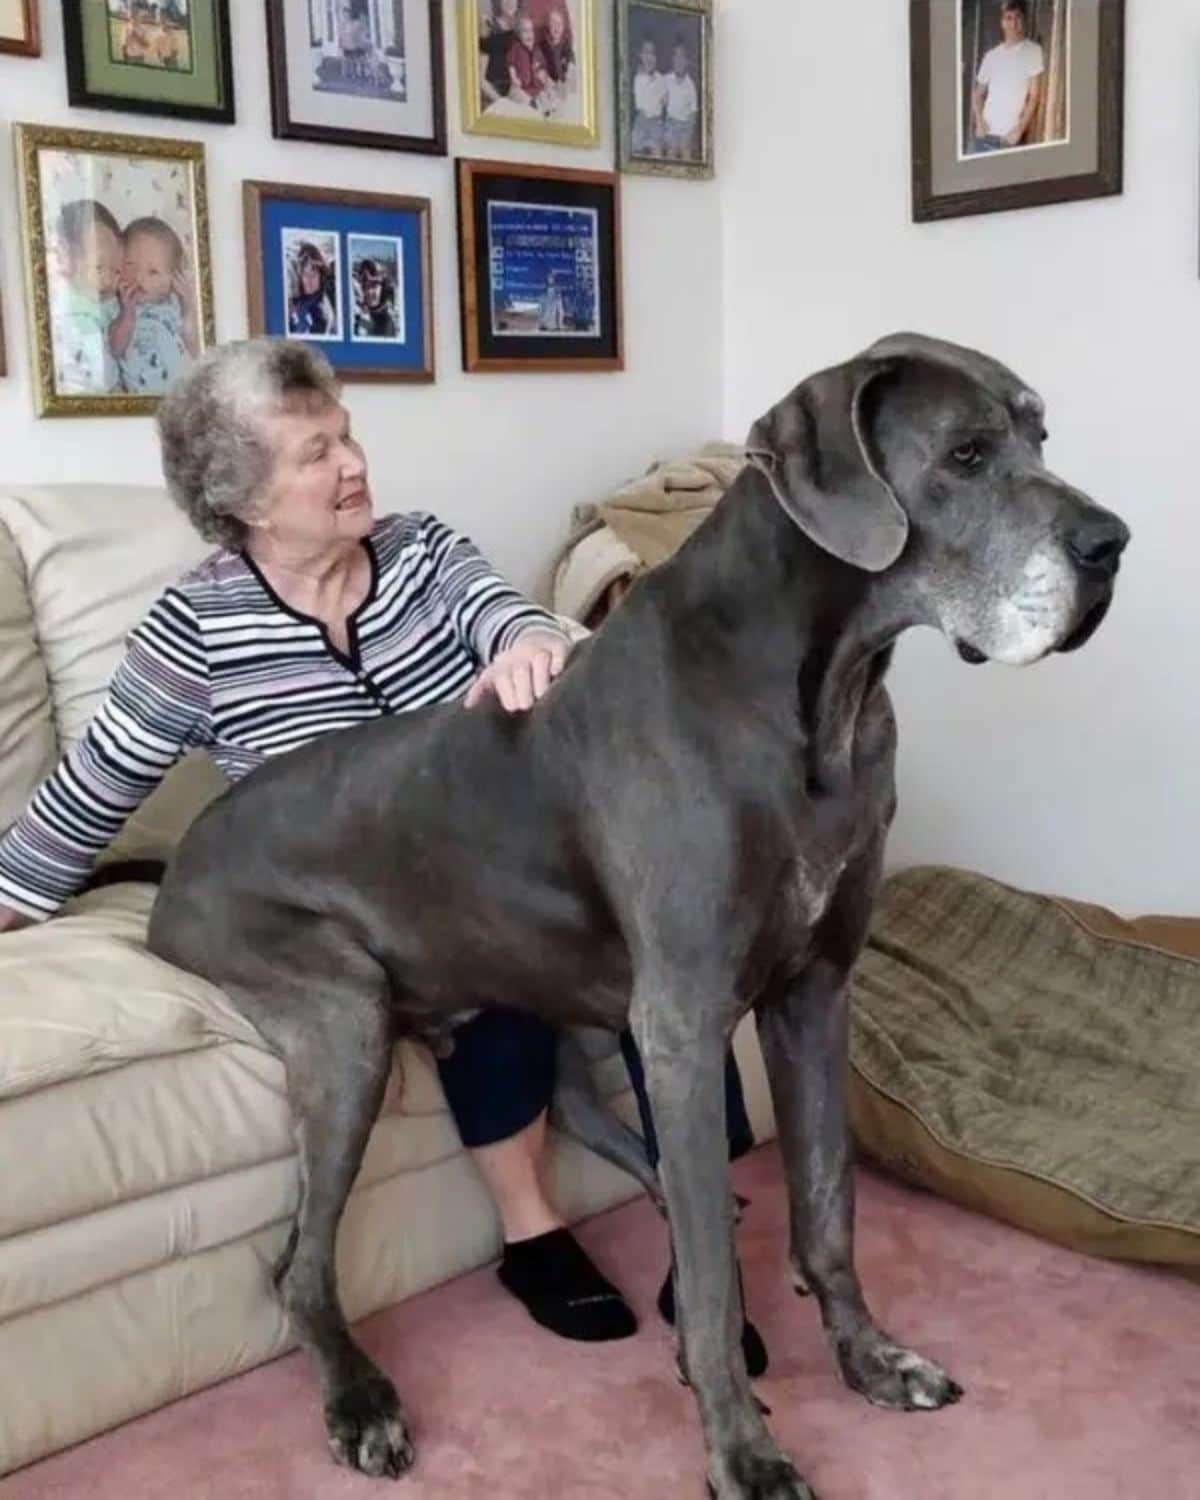 large grey dog sitting on a brown sofa next to an old woman and the dog's front legs are on the floor